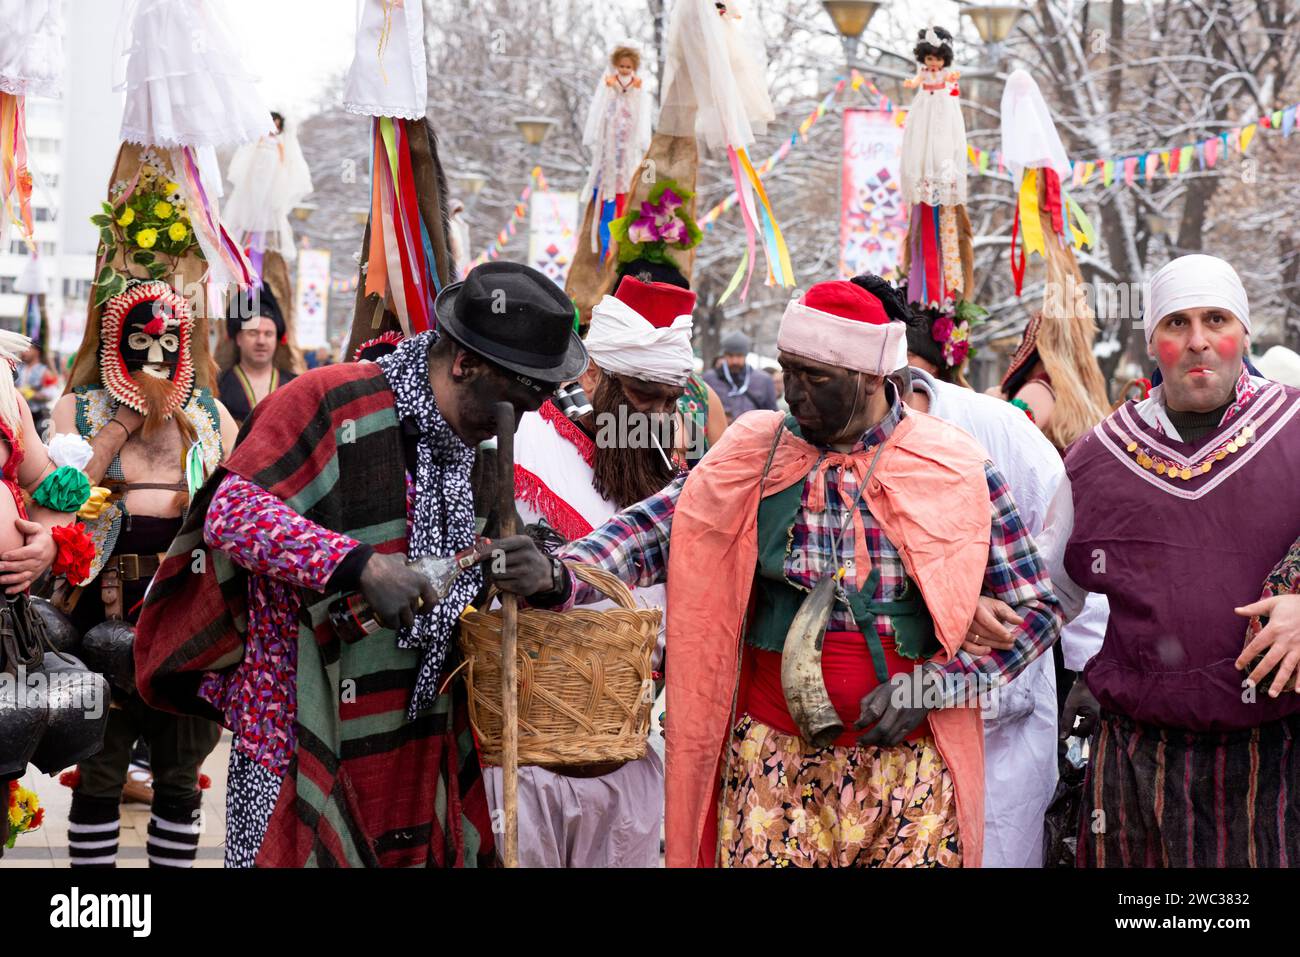 Masked participants with painted faces from Central Bulgaria at the Surva International Masquerade and Mummers Festival in Pernik, Sofia Region, Bulgaria, Eastern Europe, Balkans, EU Stock Photo